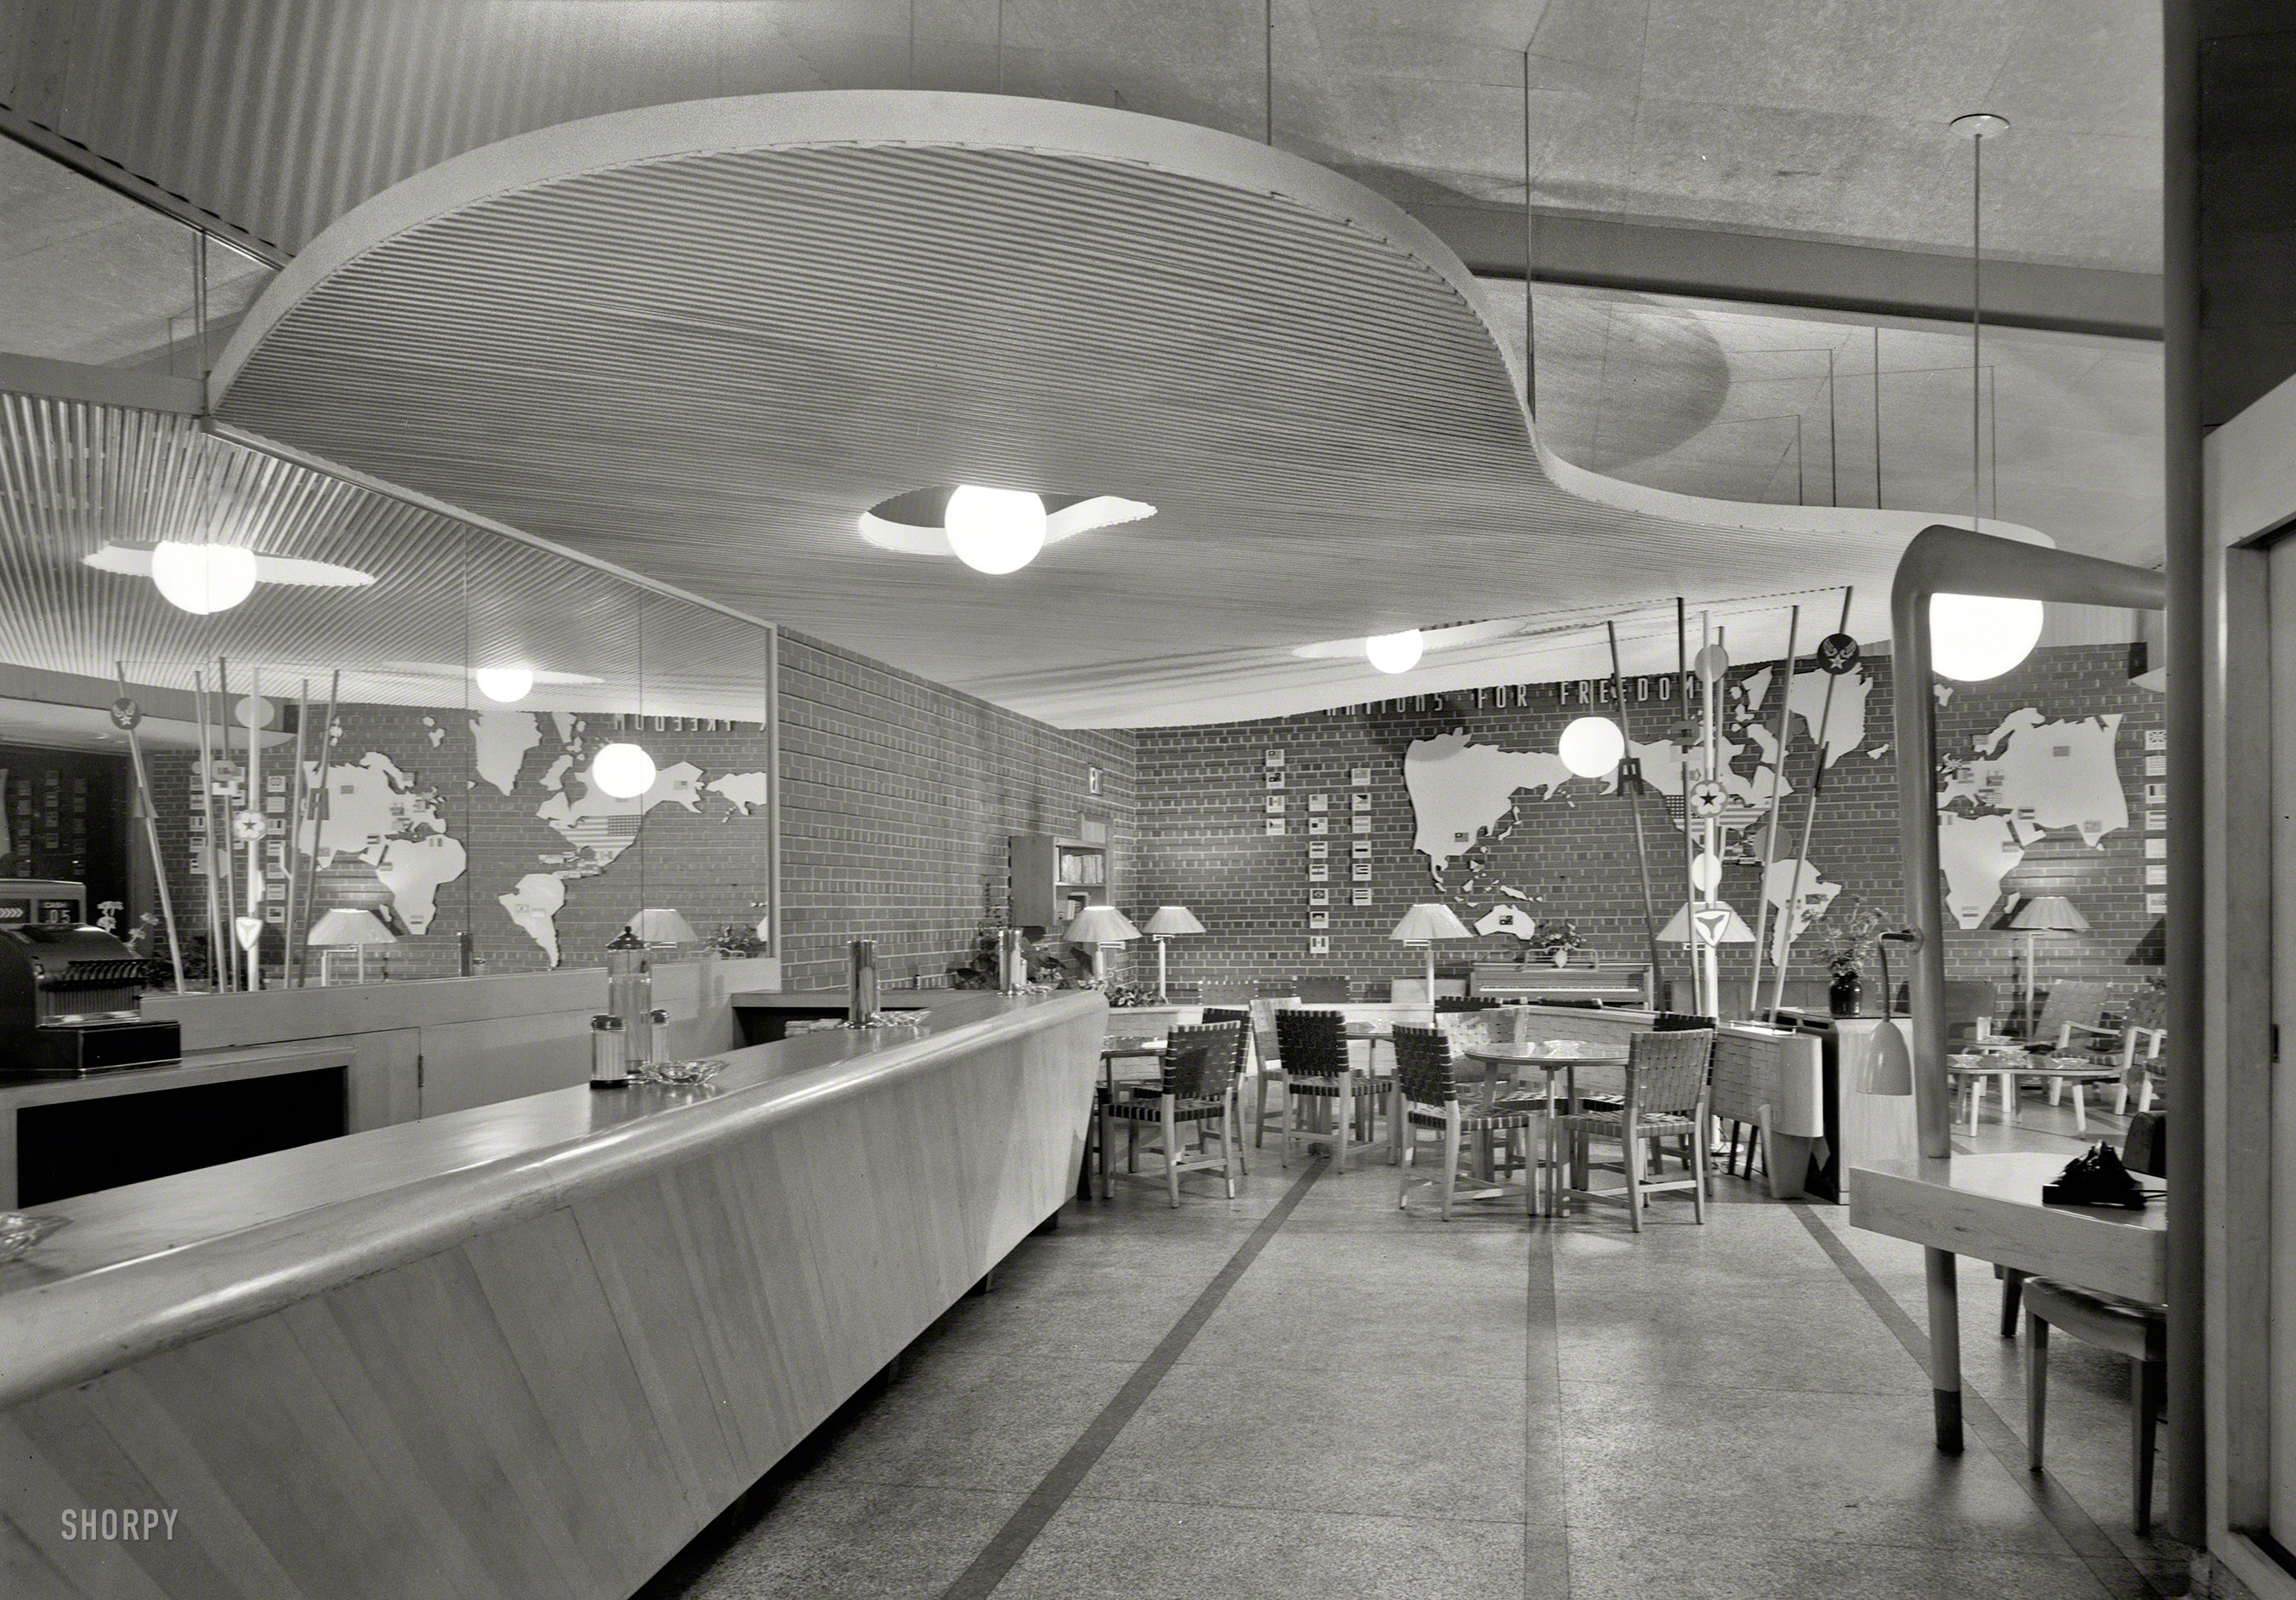 Sept. 3, 1943. "Harrisburg, Pa., U.S.O. -- Pennsylvania Railroad Canteen & Lounge, interior." Large-format negative by Gottscho-Schleisner. View full size.